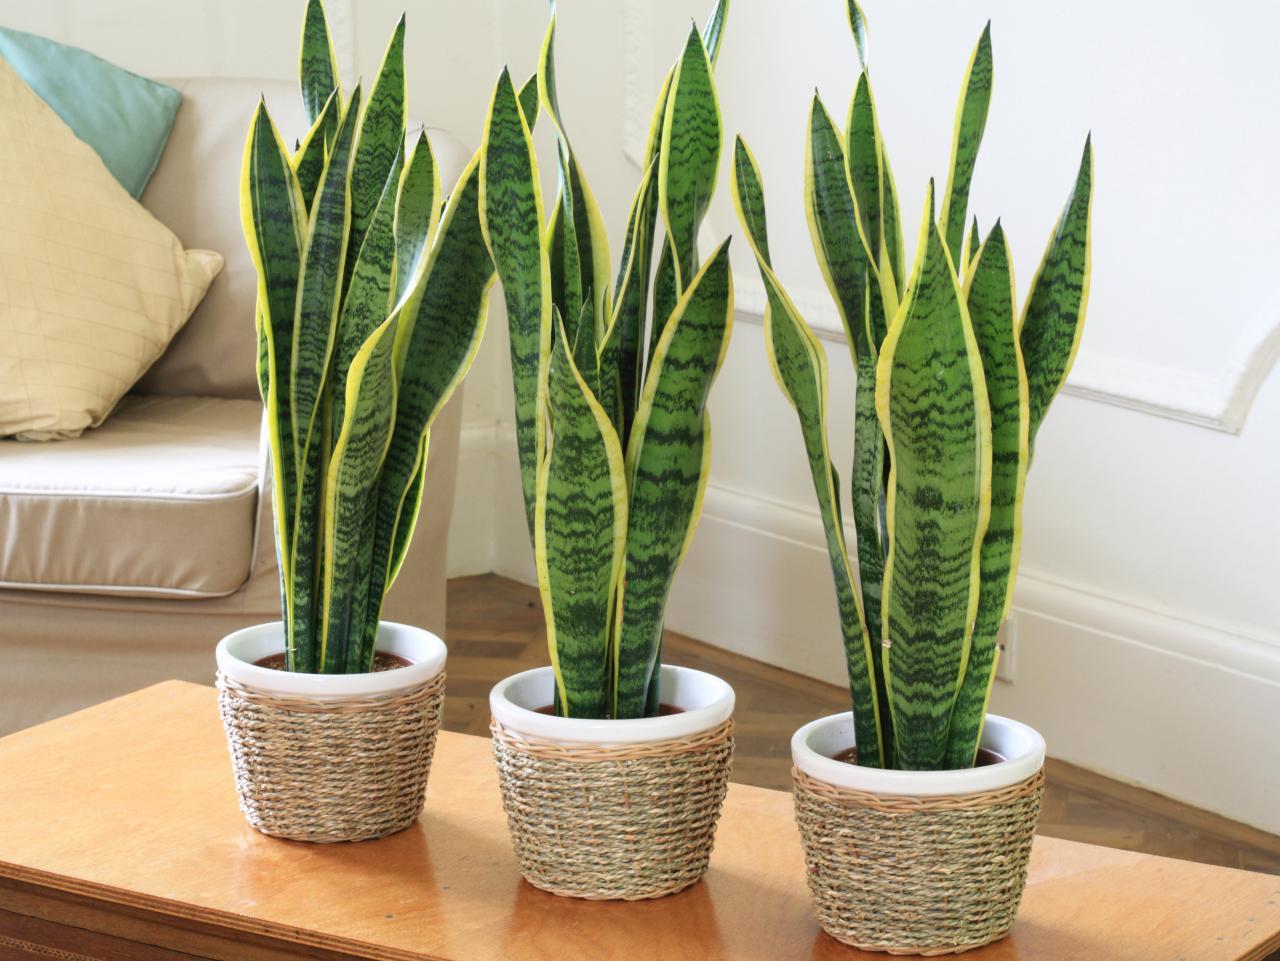 5 Houseplants Almost Anyone Can Keep Alive - The DiGiorgio Team | Homes